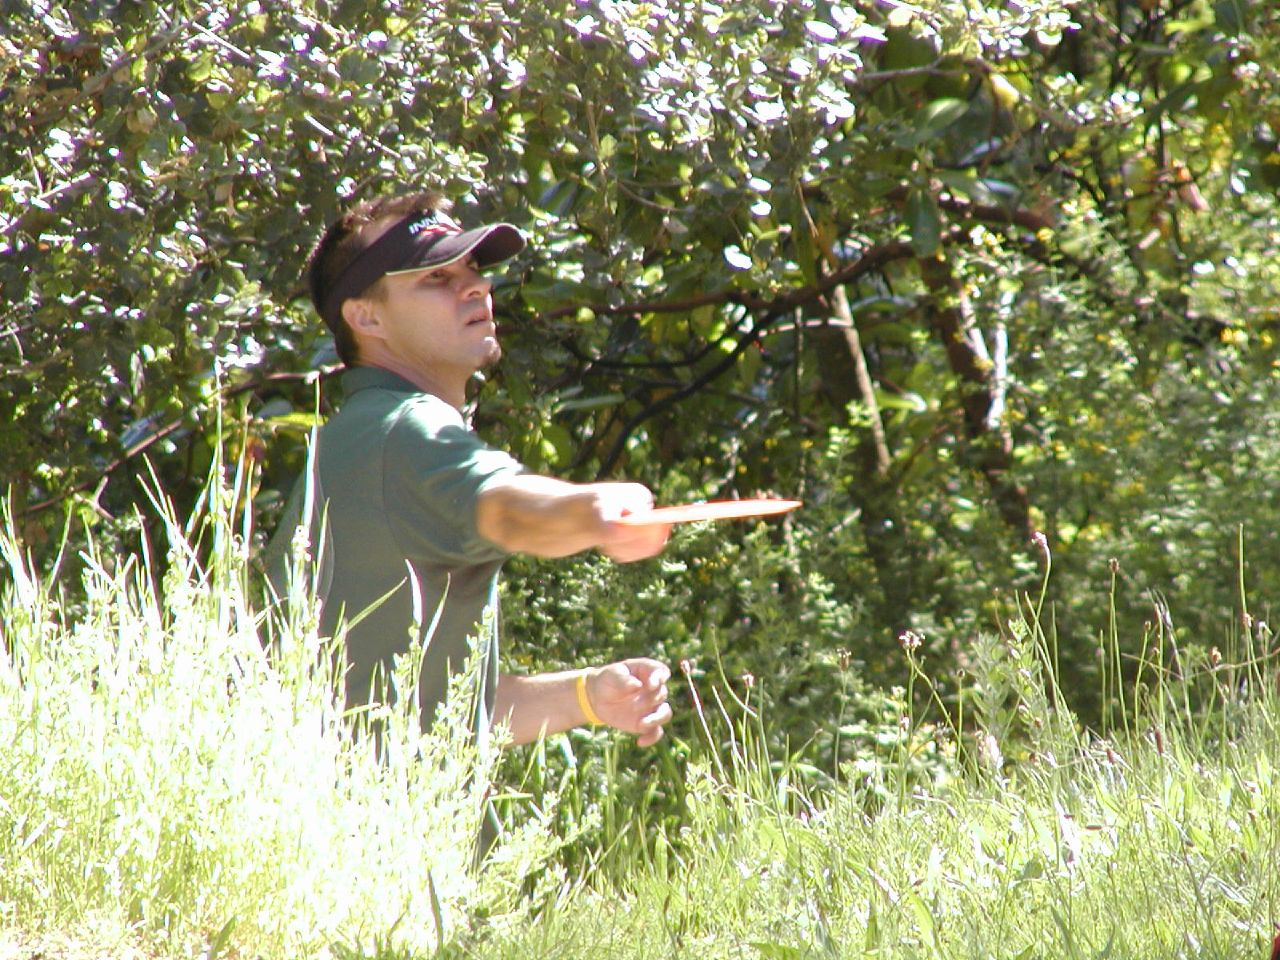 a man holding soing in the grass near trees